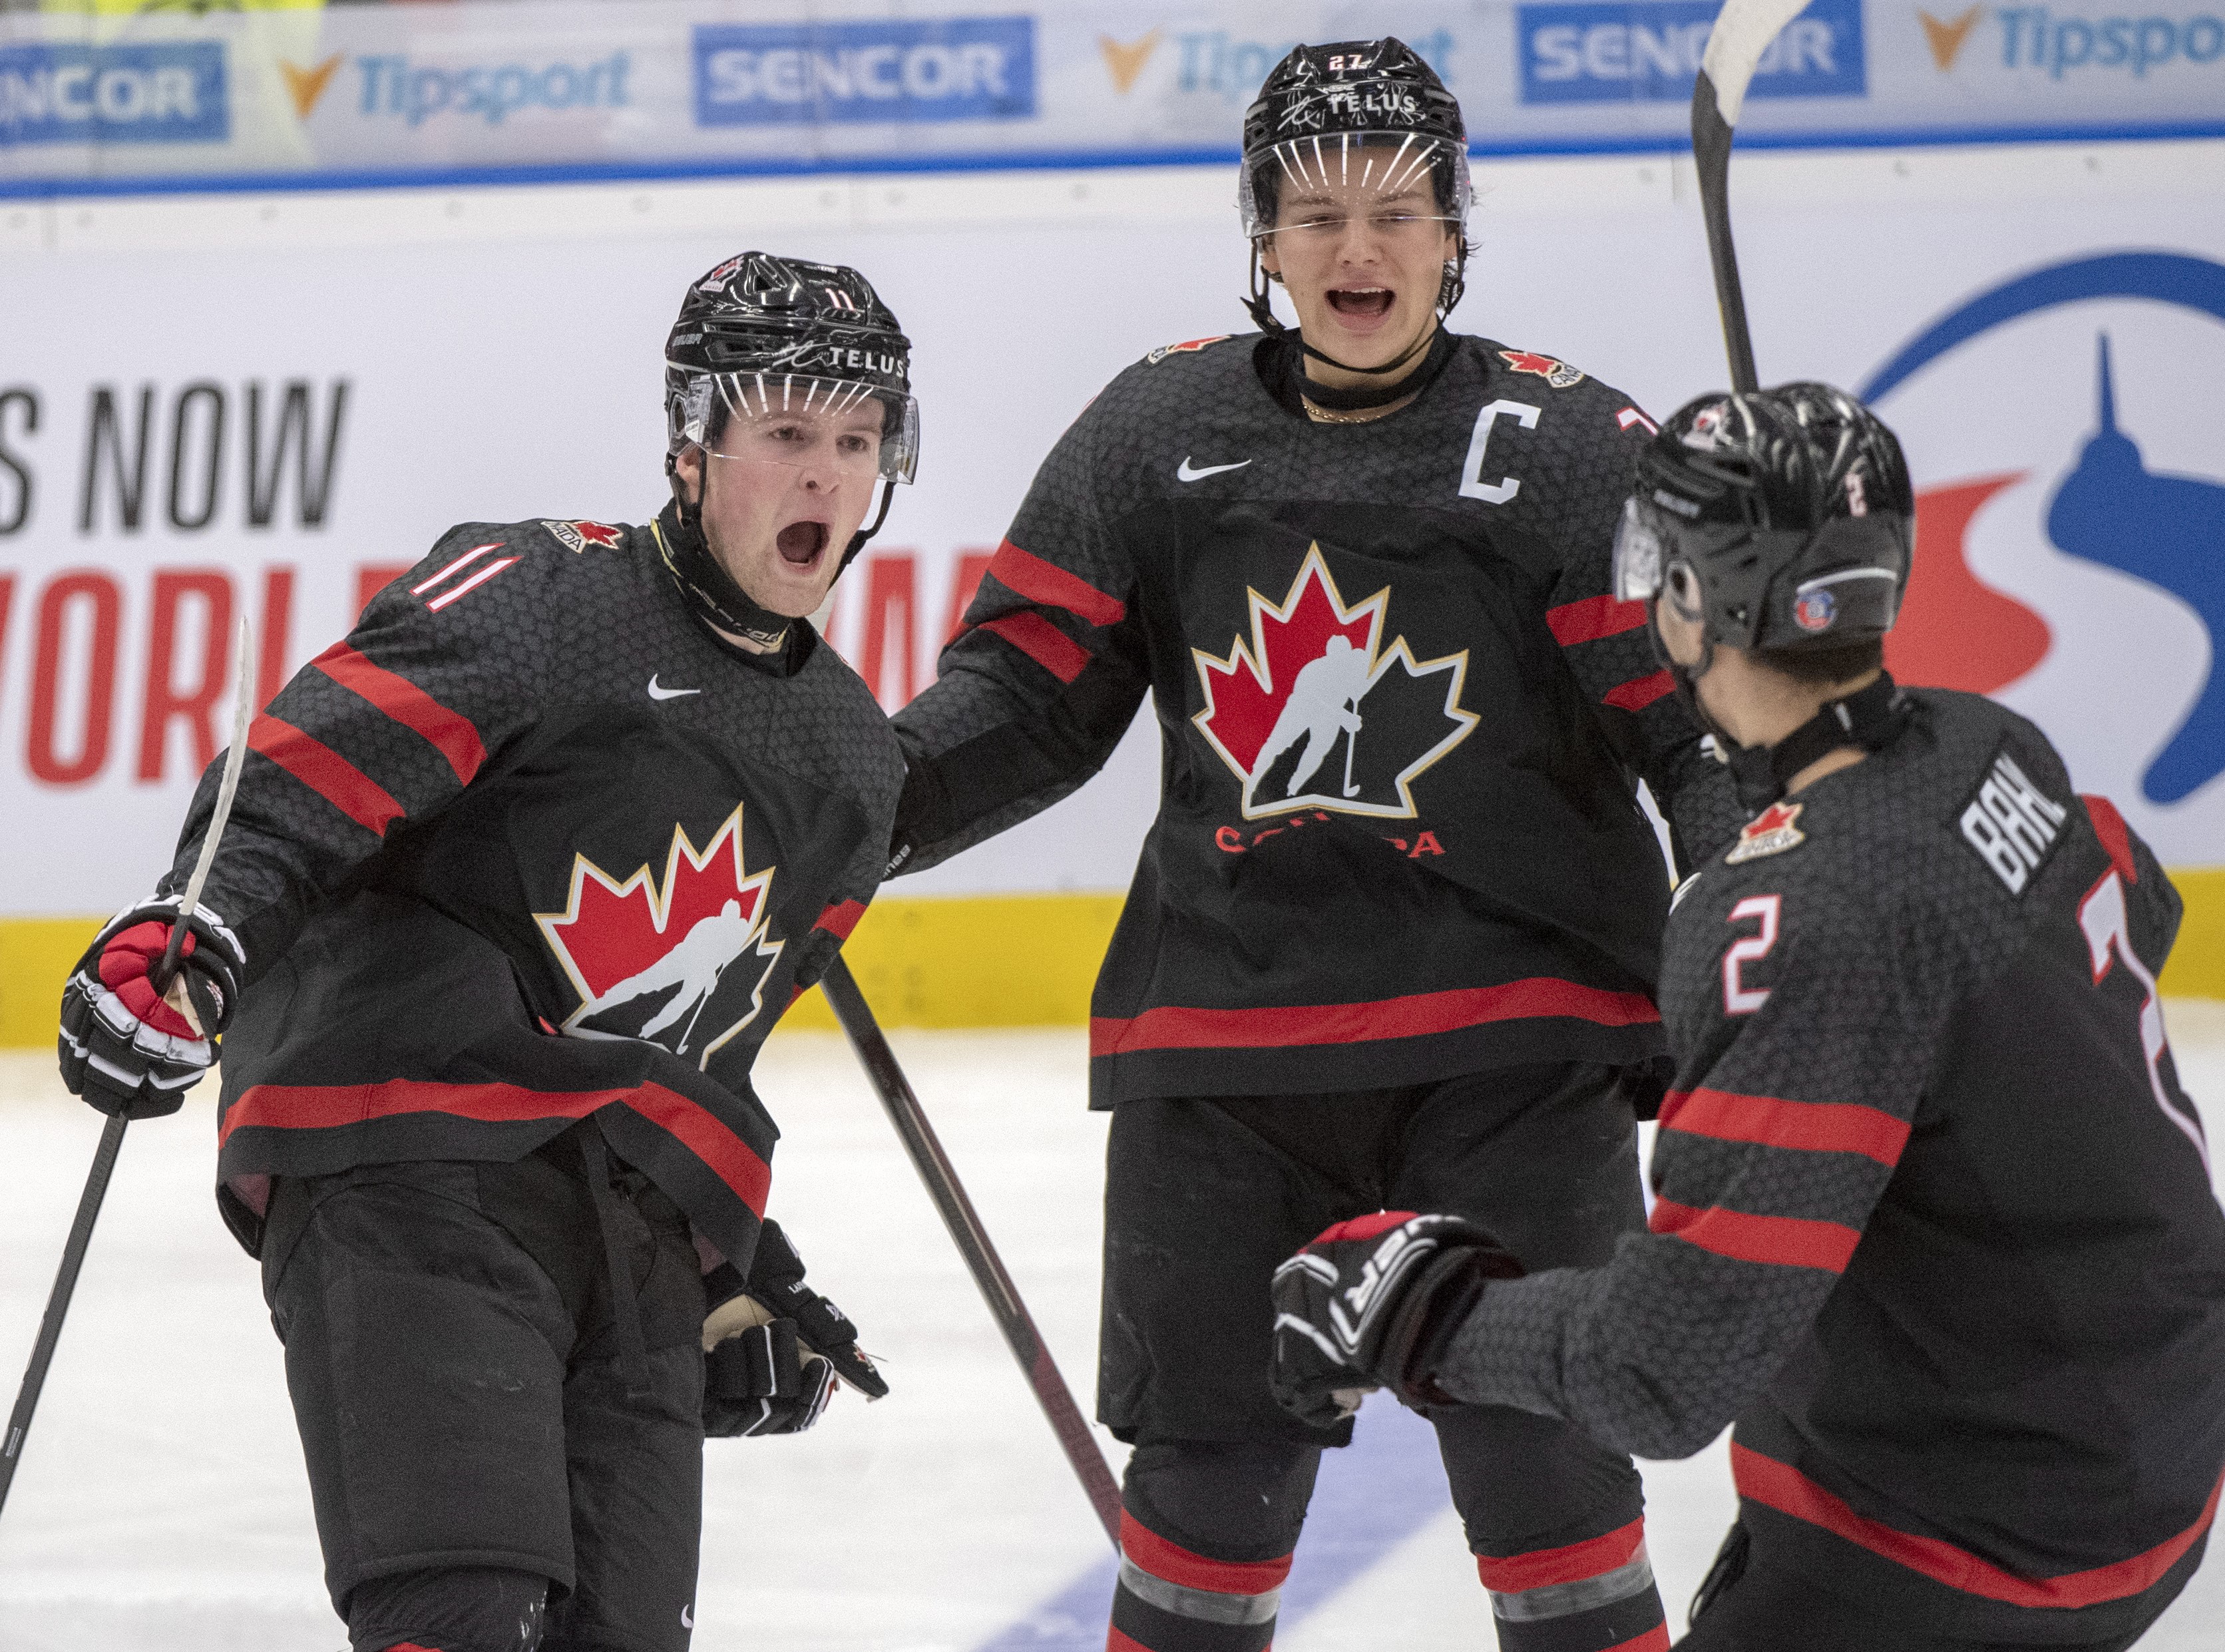 World Juniors Canada shuts down Finland to advance to the gold medal